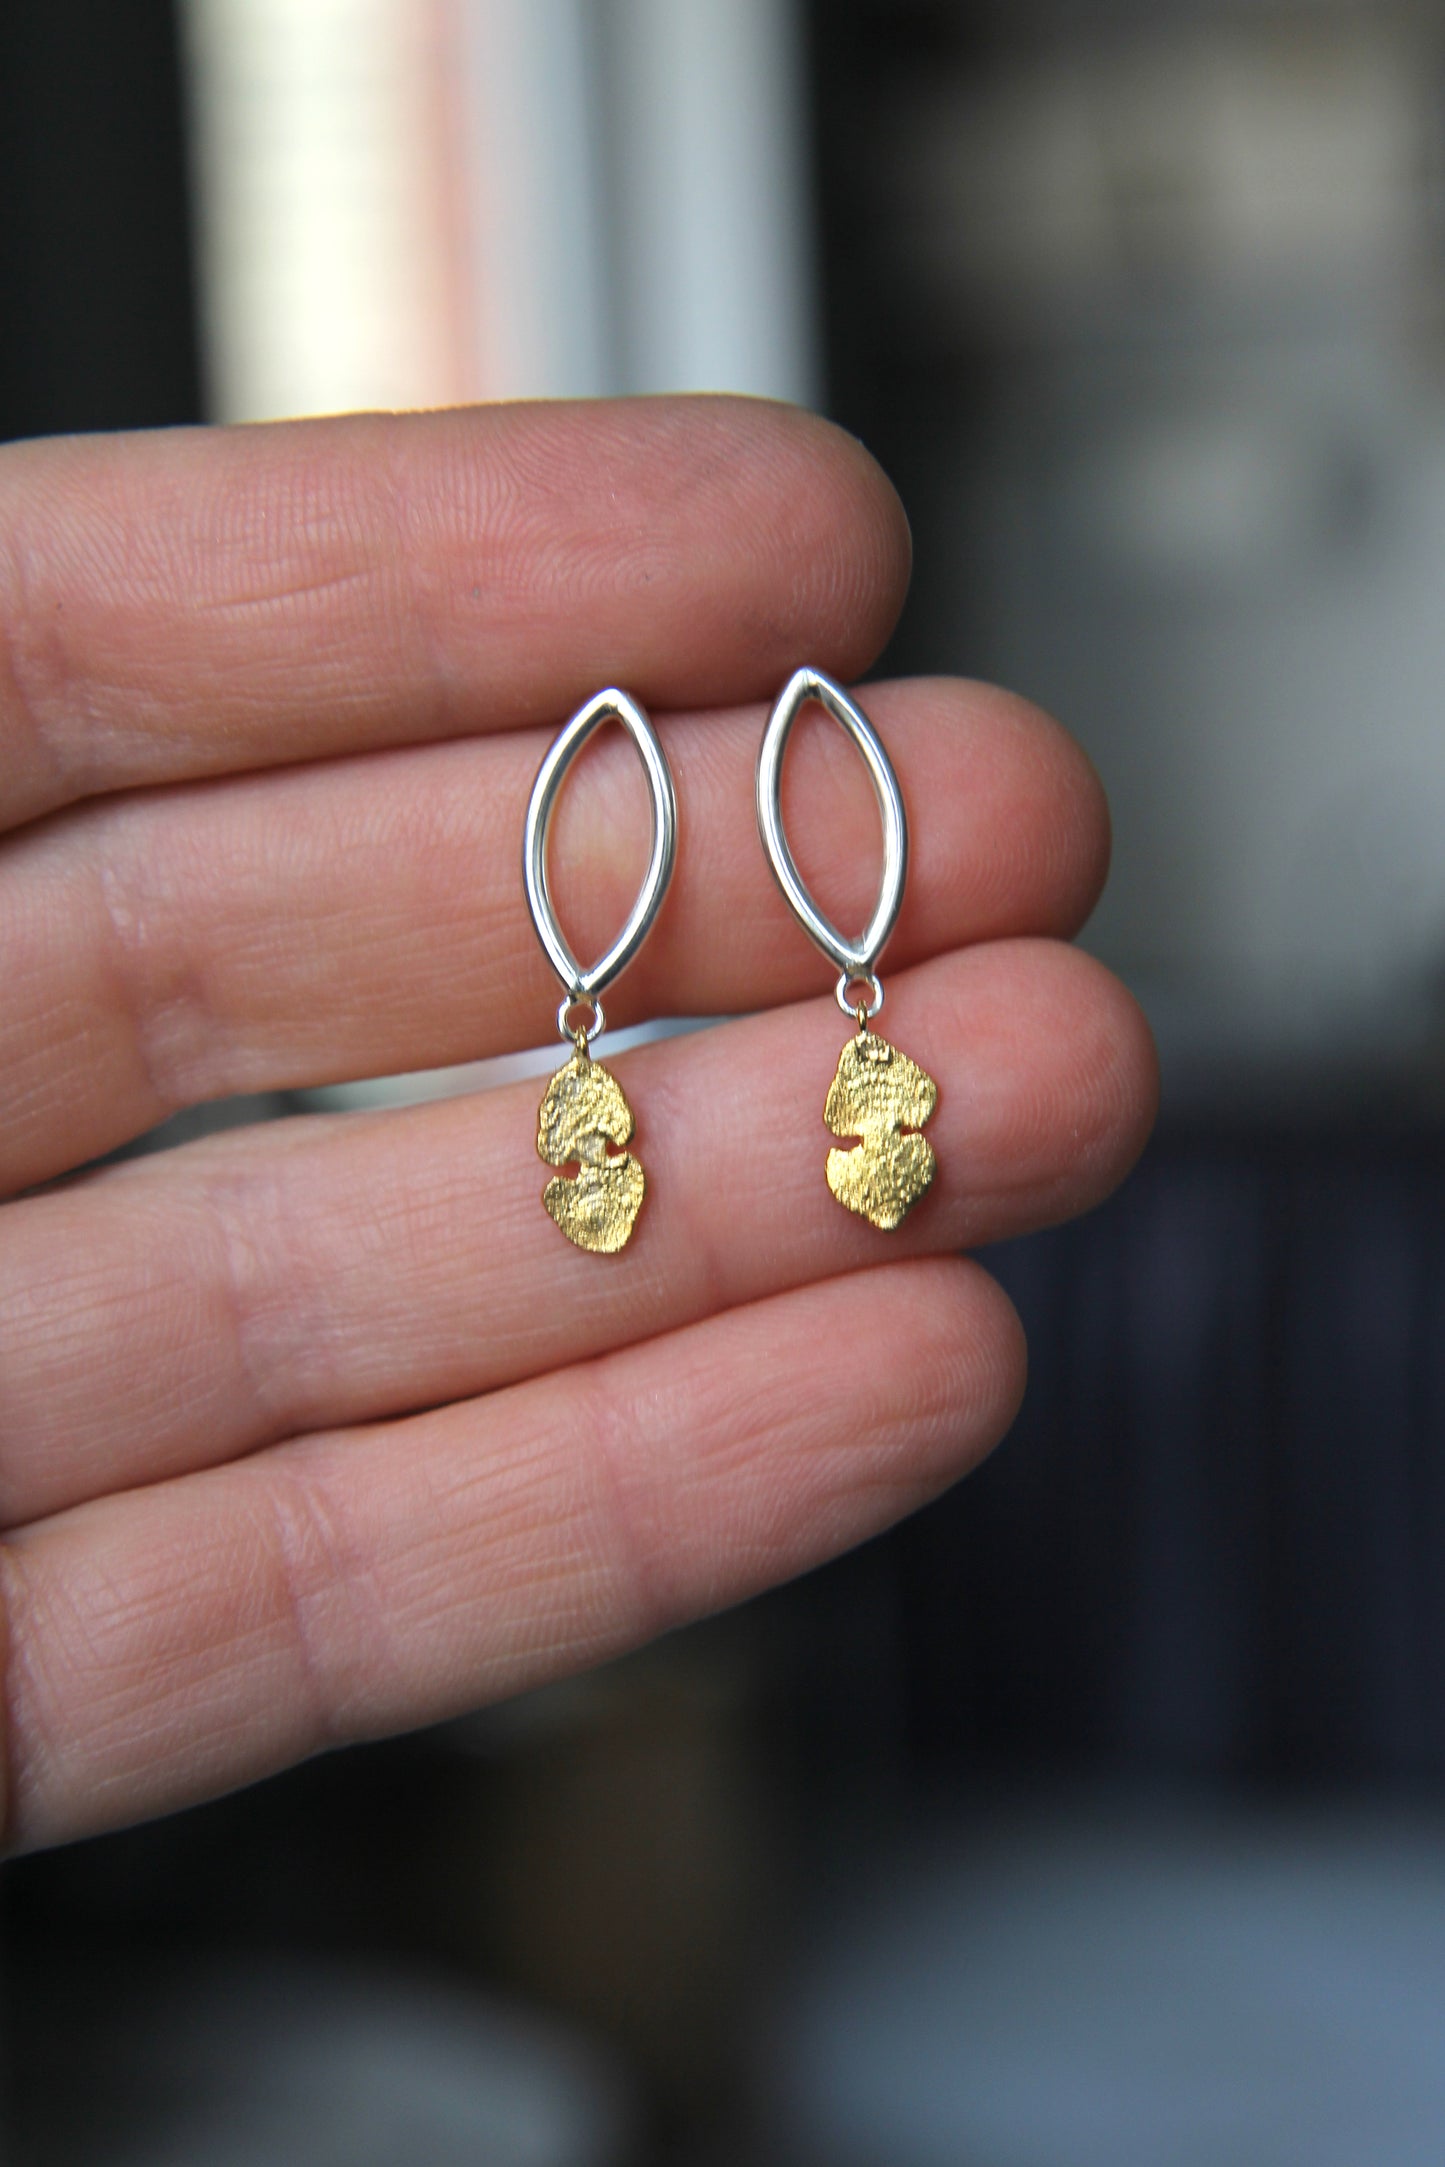 Botanical Silver Earrings with Gold-Plated Leaf